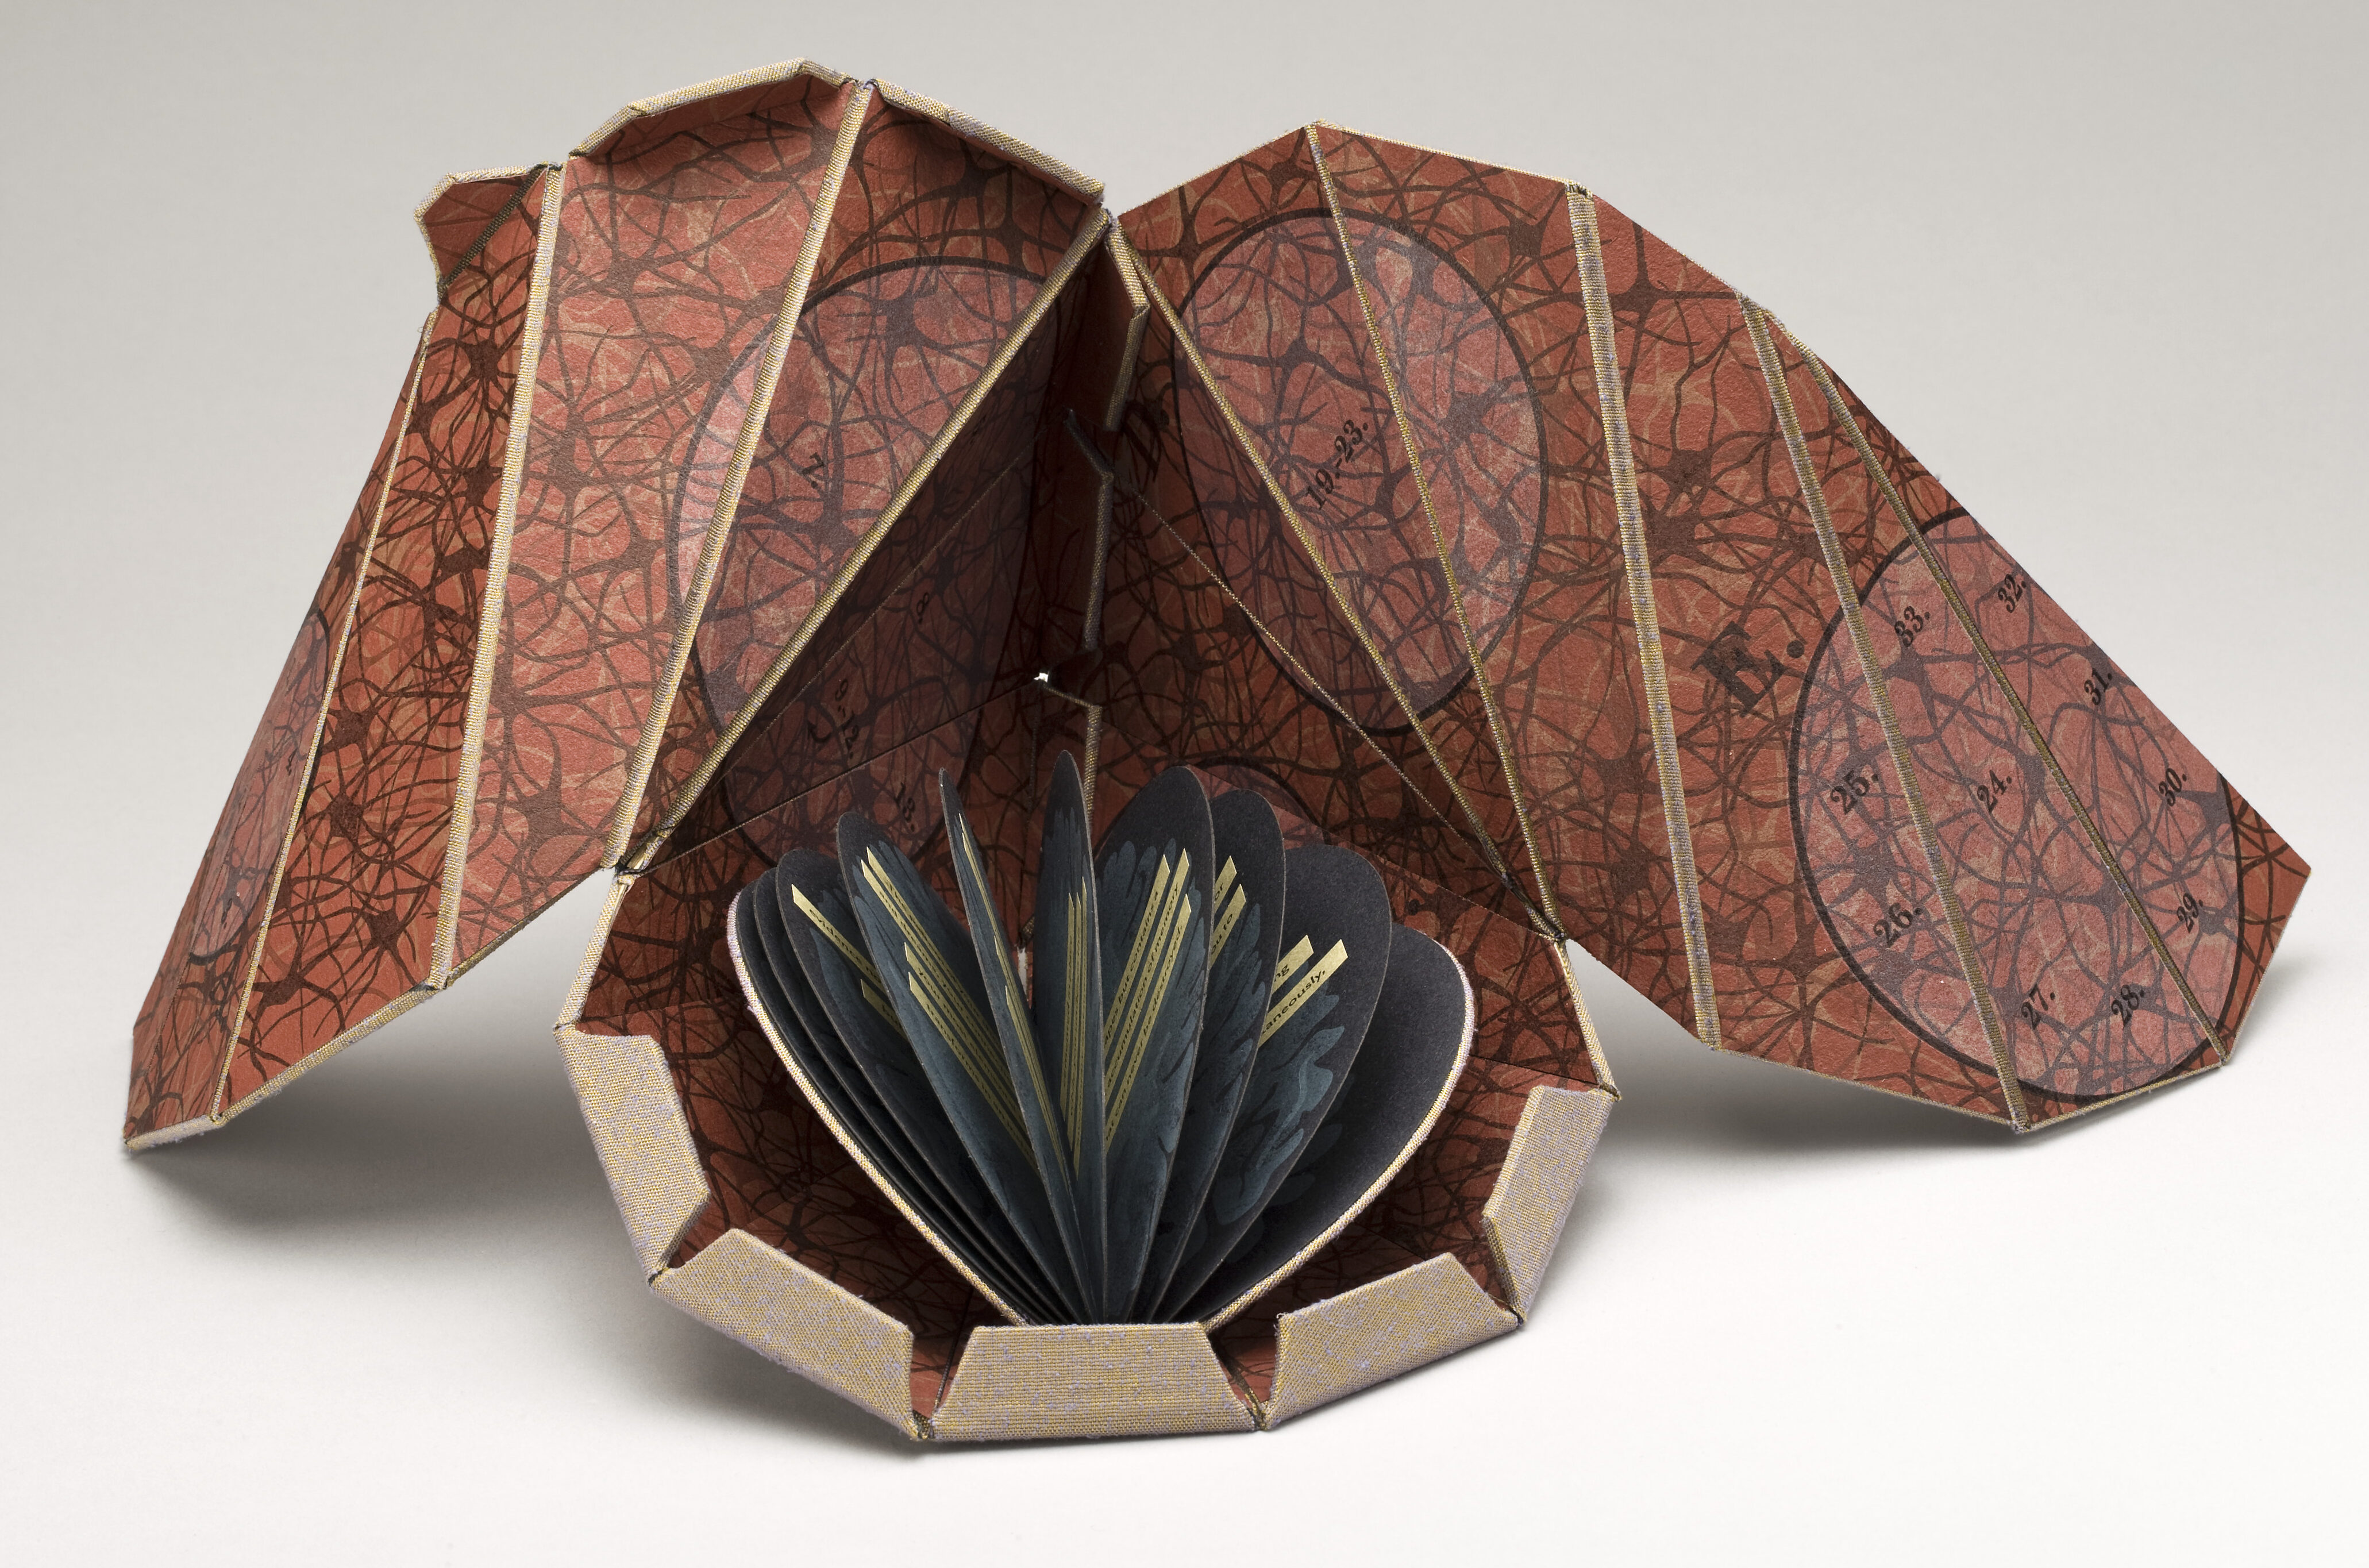 An open artist’s book that is teardrop-shaped with two open flaps that resemble wings. The interior is an earthy red color with veiny brown lines. Inside the open teardrop shape is a tiny circular book with navy half-moon shaped pages.